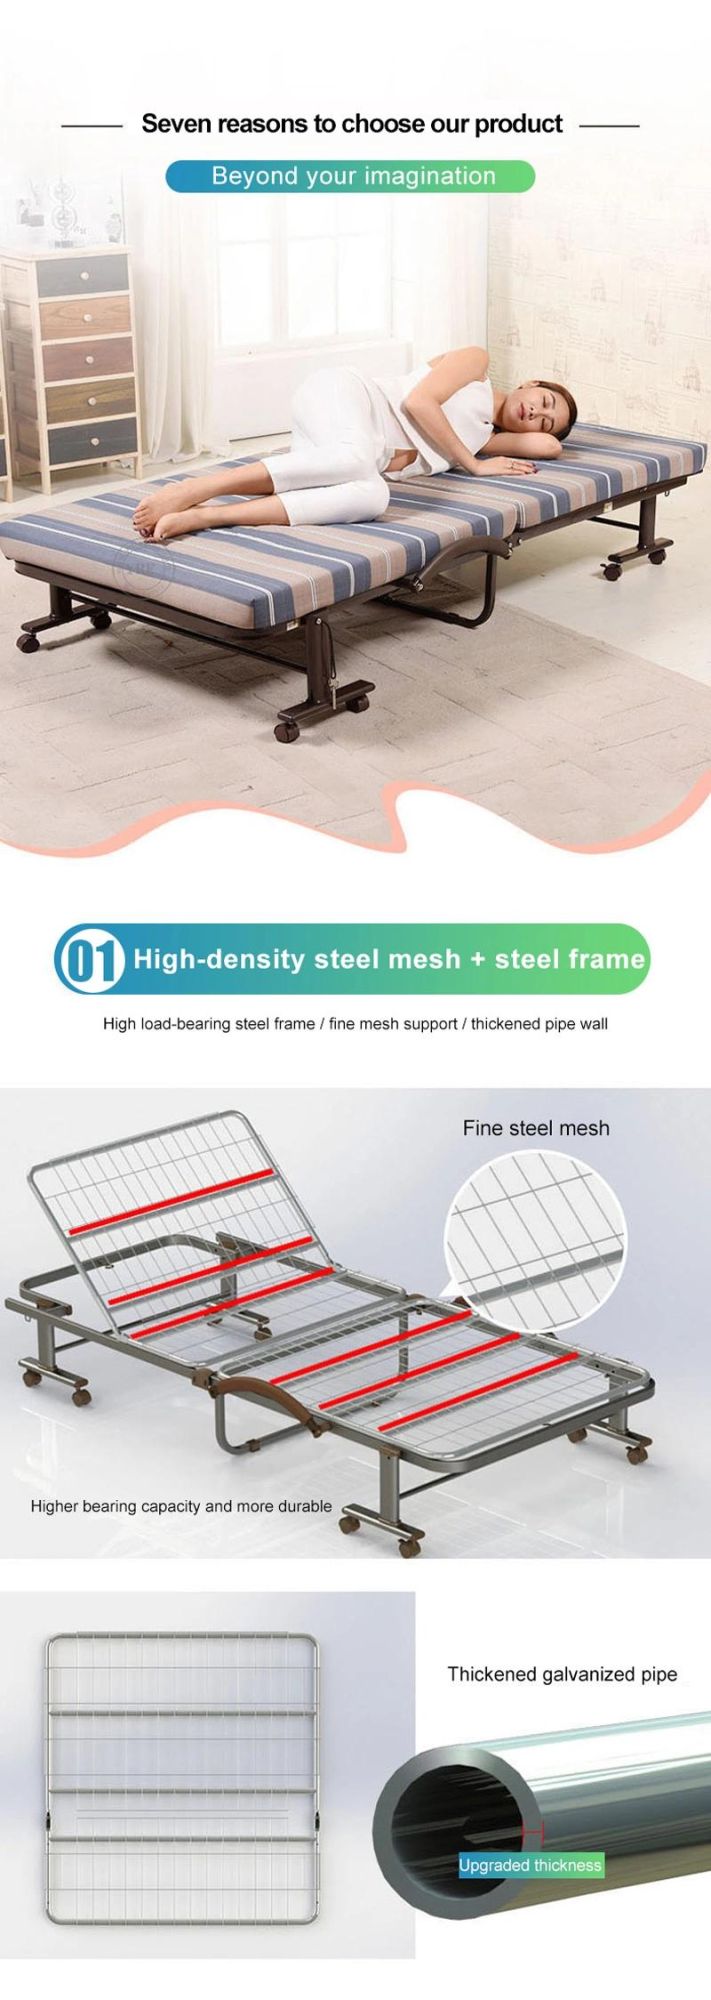 Wholesale Folding Bed Lightweight Furniture Metal Frame on Wheels with 2 Cranks